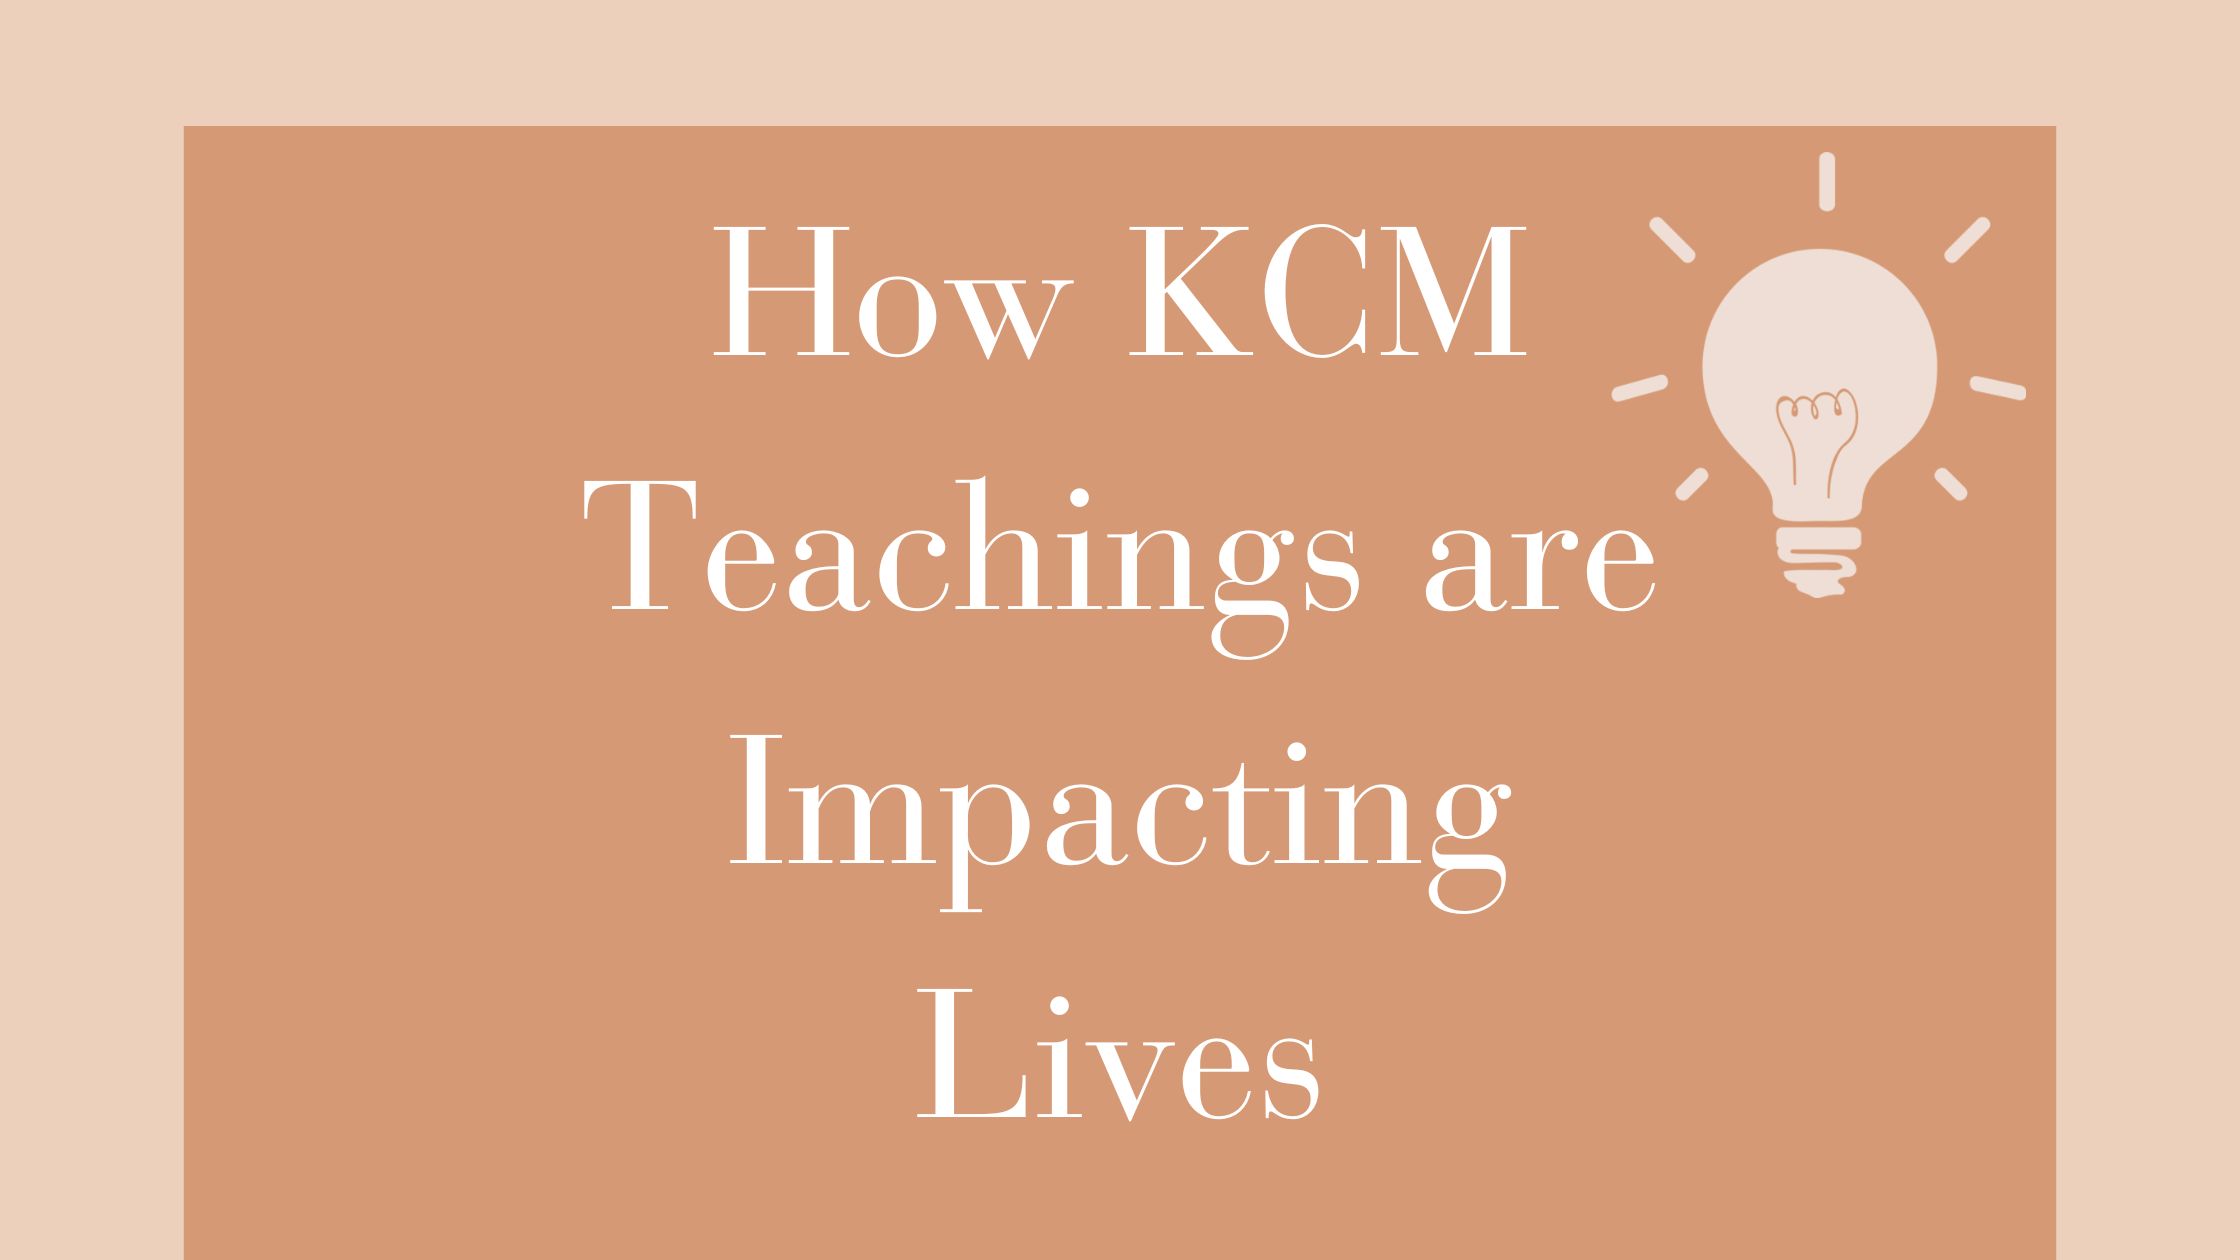 How KCM teachings are impacting lives